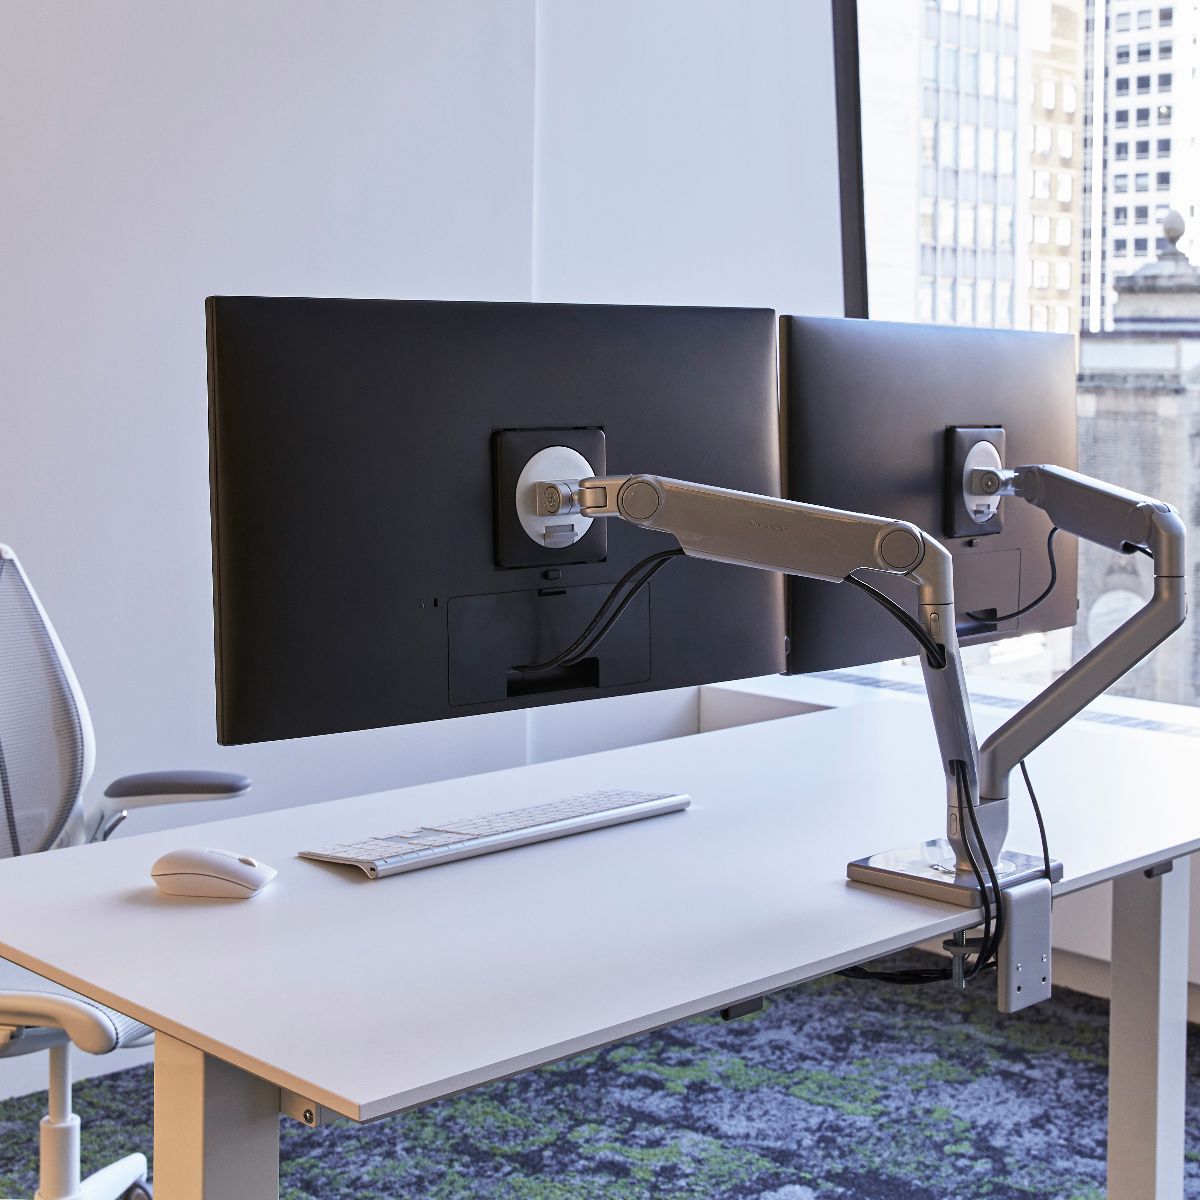 How to properly use a flat-screen monitor arm at the office